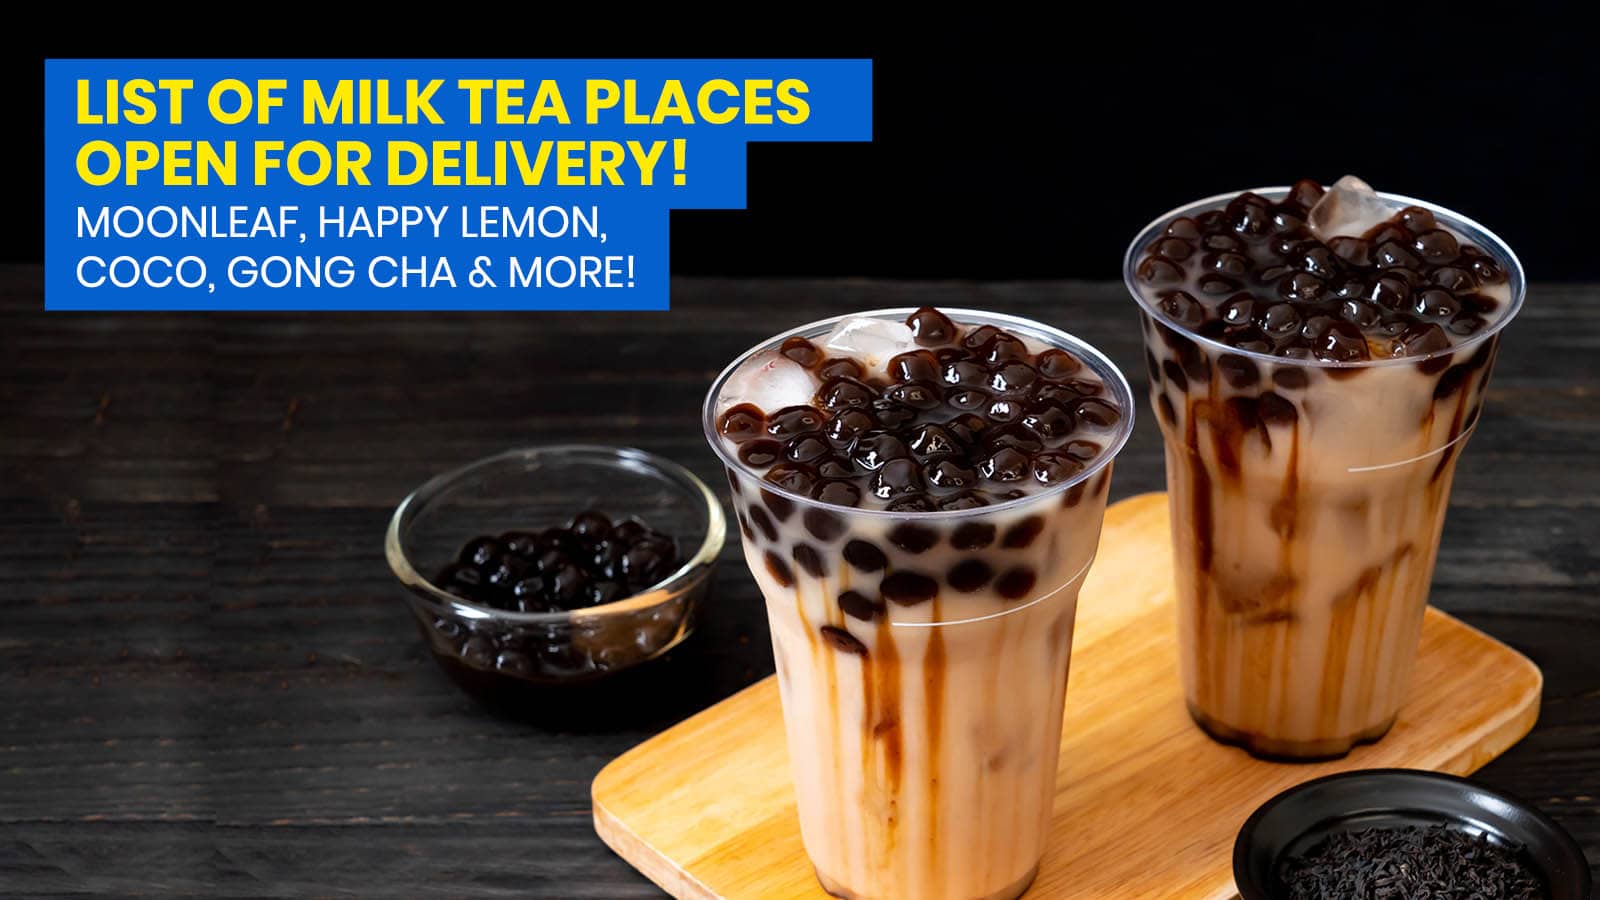 MILK TEA DELIVERY: Open Branches of Moonleaf, CoCo, Happy Lemon, Gong Cha & More!